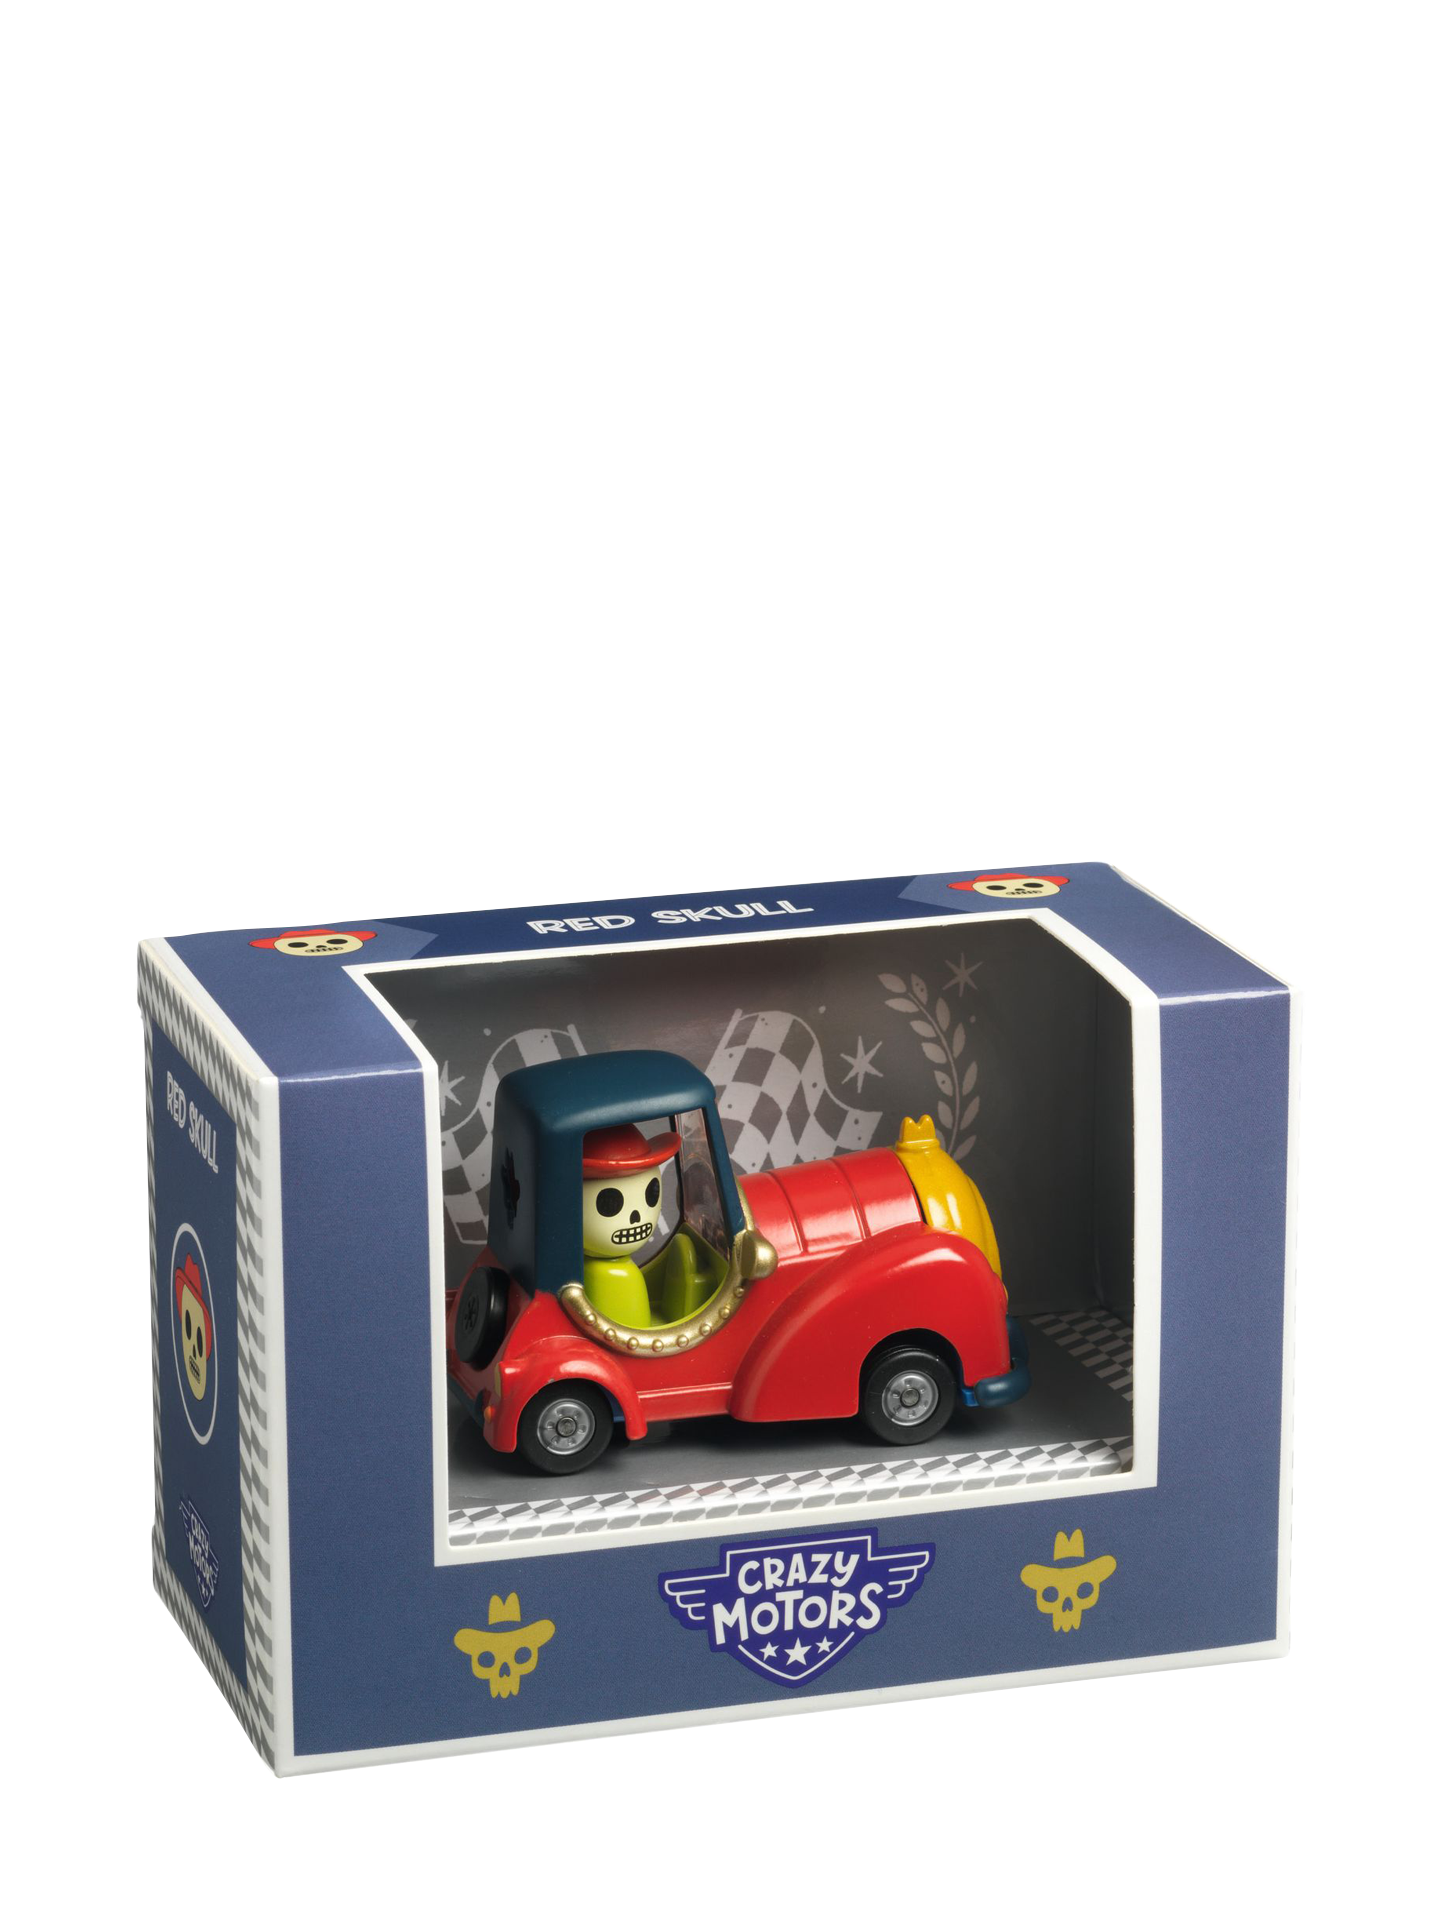 Red Skull Race Car (Crazy motors collection)